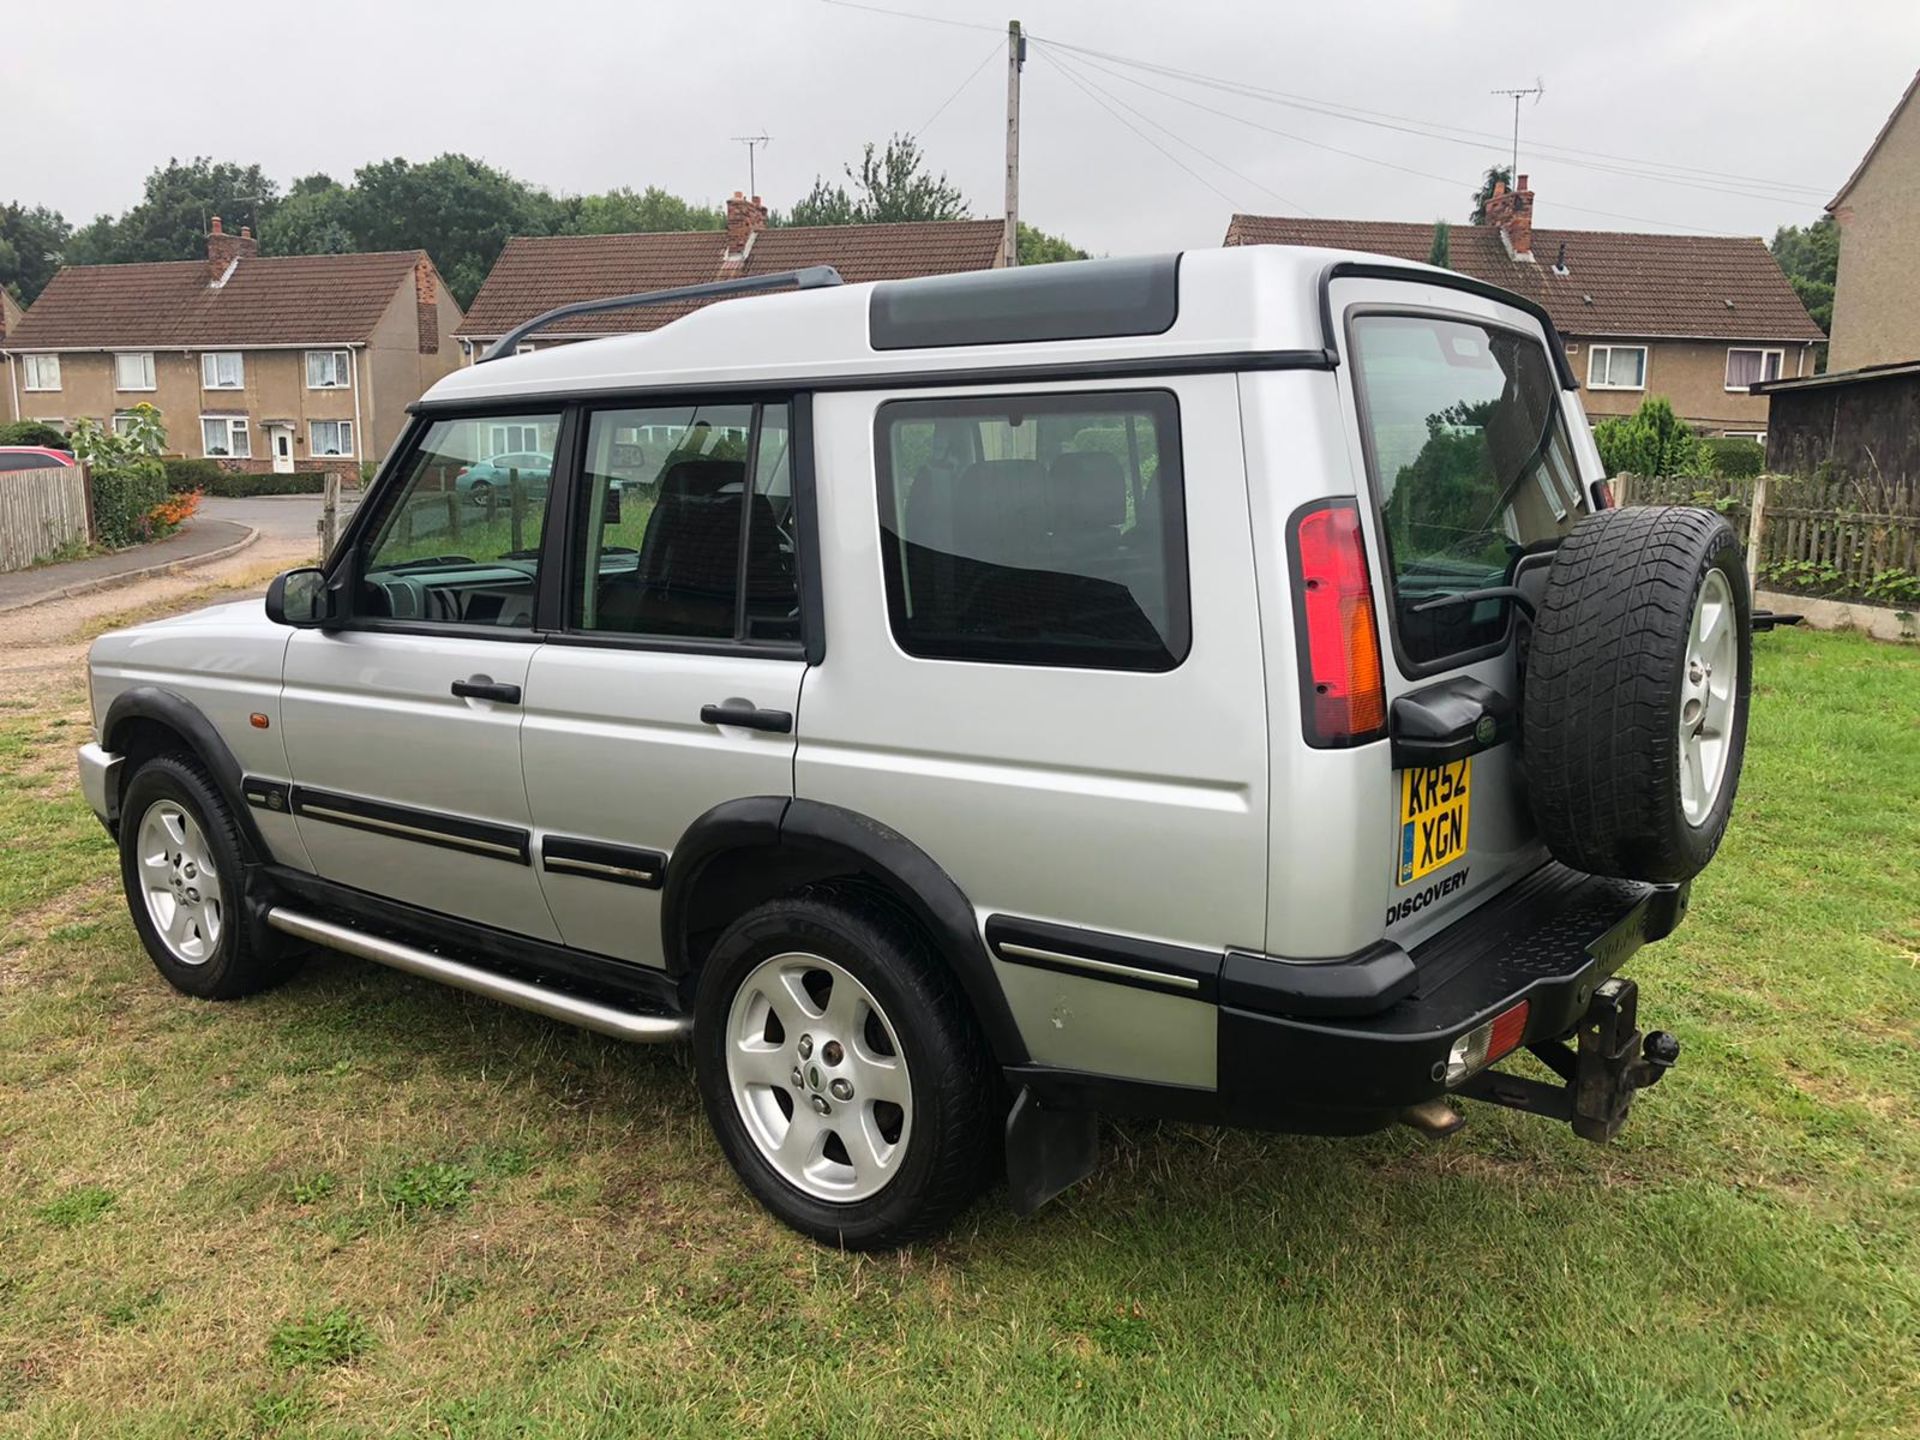 2002 LAND ROVER DISCOVERY TD5 ES AUTO SILVER 7 SEATER ESTATE, 2.5 DIESEL, 160K MILES *NO VAT* - Image 5 of 18